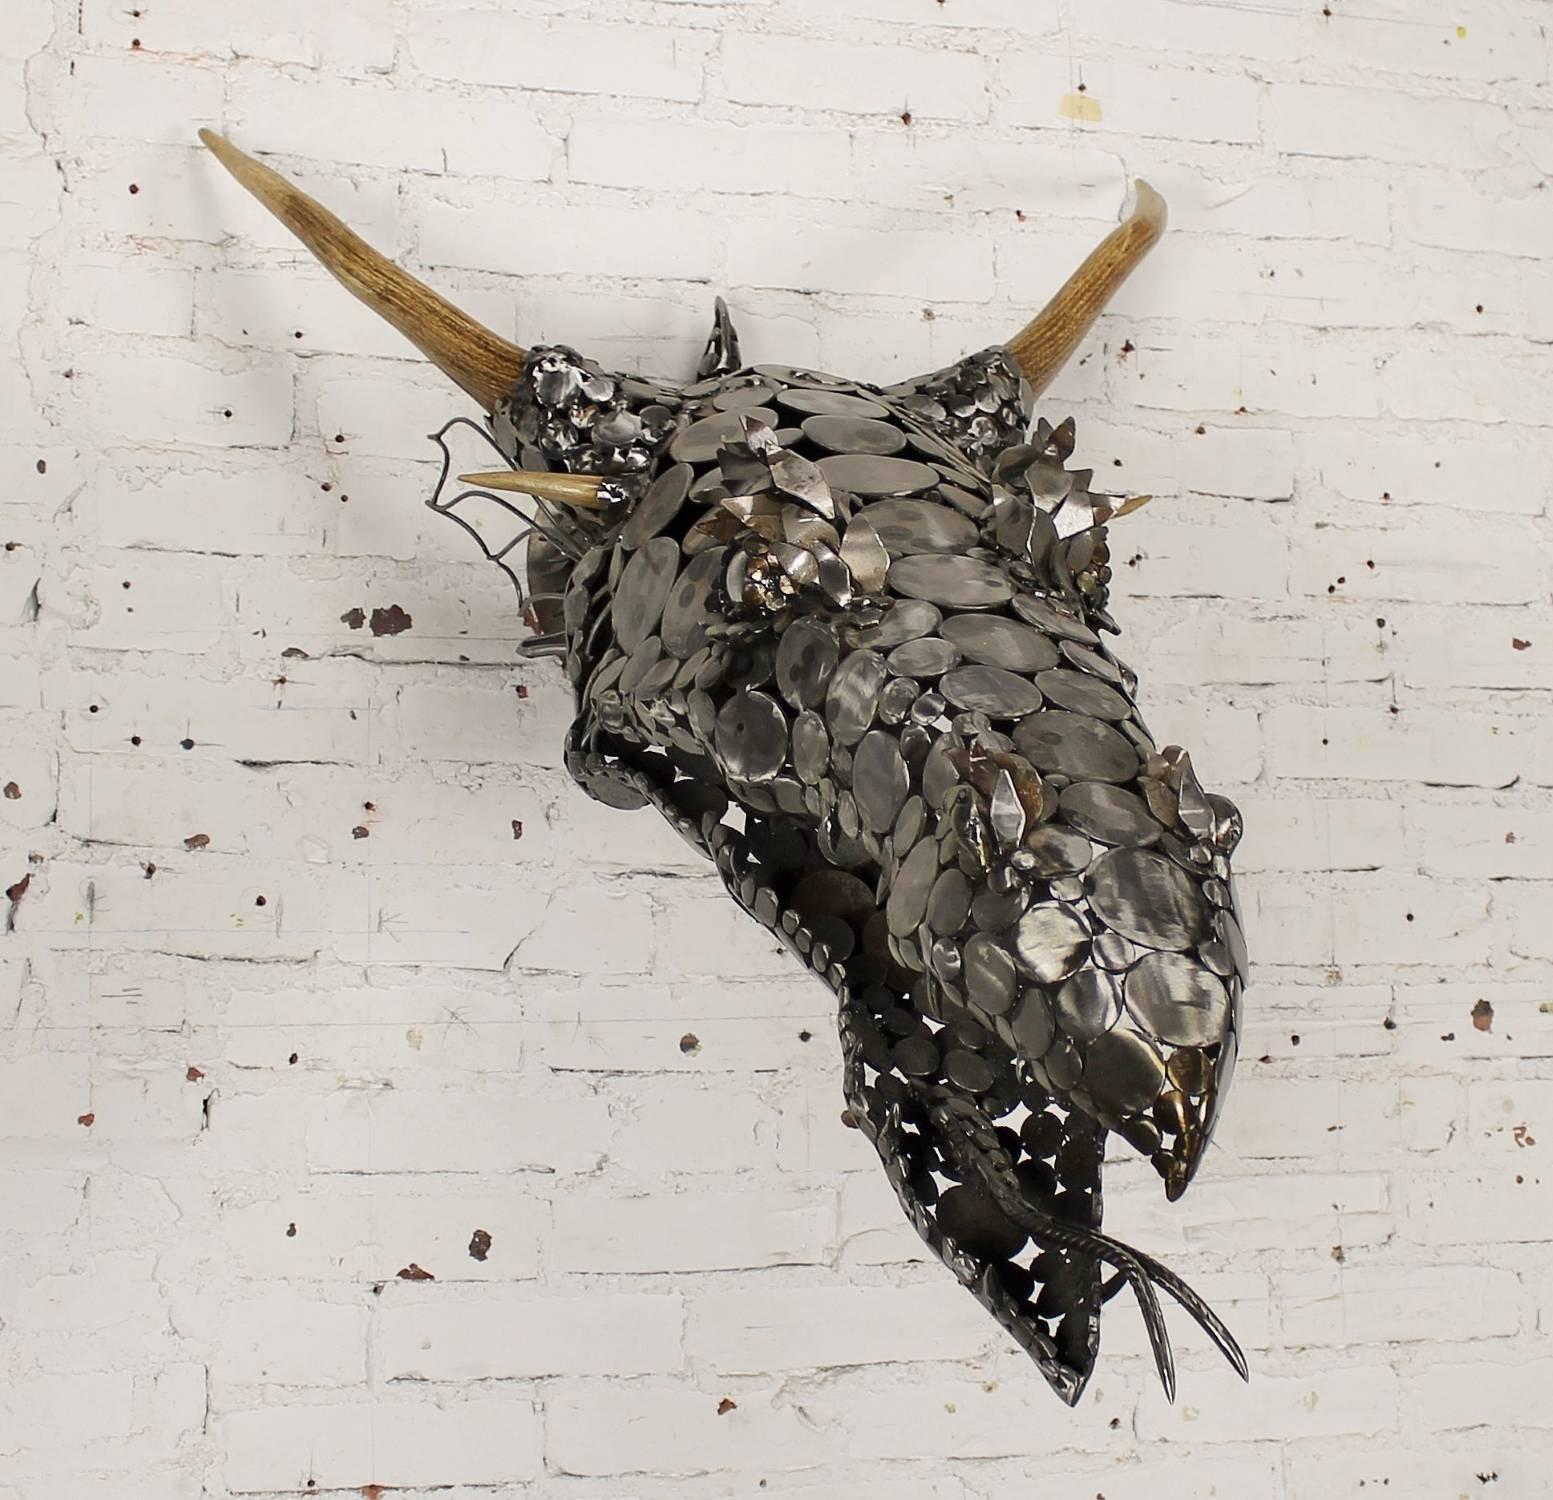 Absolutely fantastic dragon head wall sculpture by Jason Startup of Topeka, Kansas. Consisting of welded scrap metal pieces and deer antler. This piece is circa 2015.

I am so in love with this magnificent dragon sculpture!! I hope our photos do